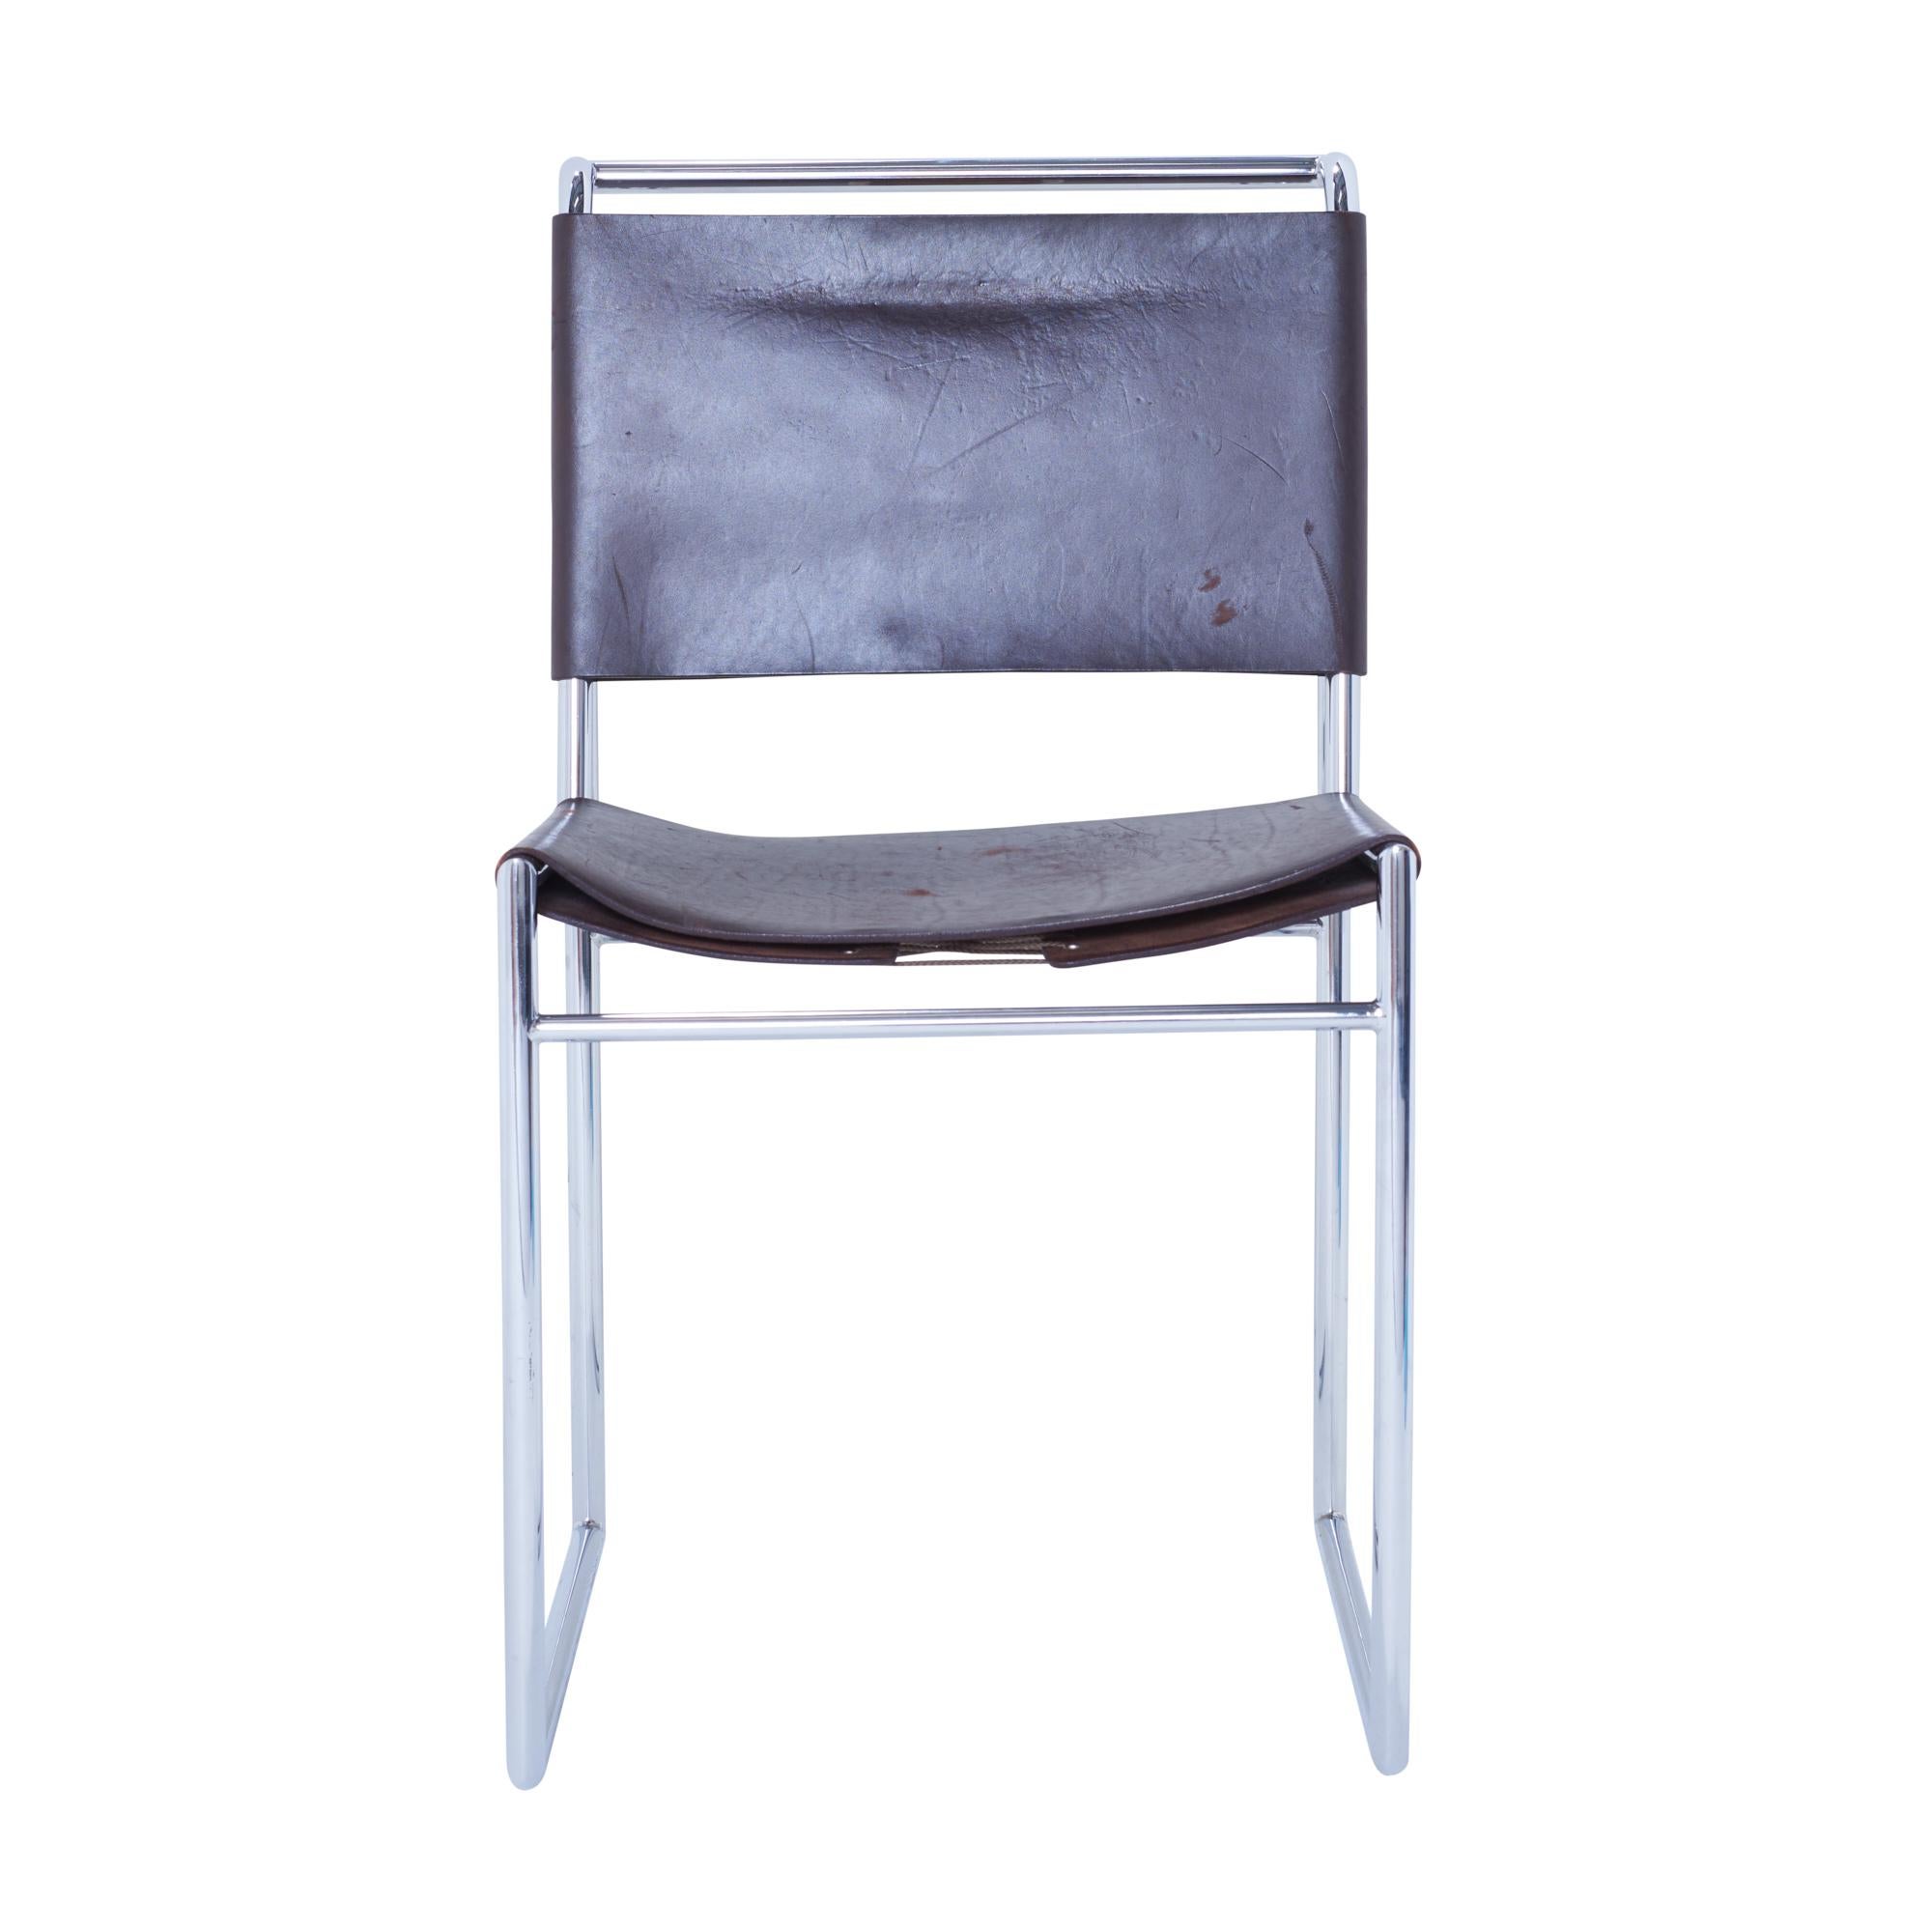 These Marcel Breuer armless corset chairs feature a chrome structure with a brown leather back and seat.

Since Schumacher was founded in 1889, our family-owned company has been synonymous with style, taste, and innovation. A passion for luxury